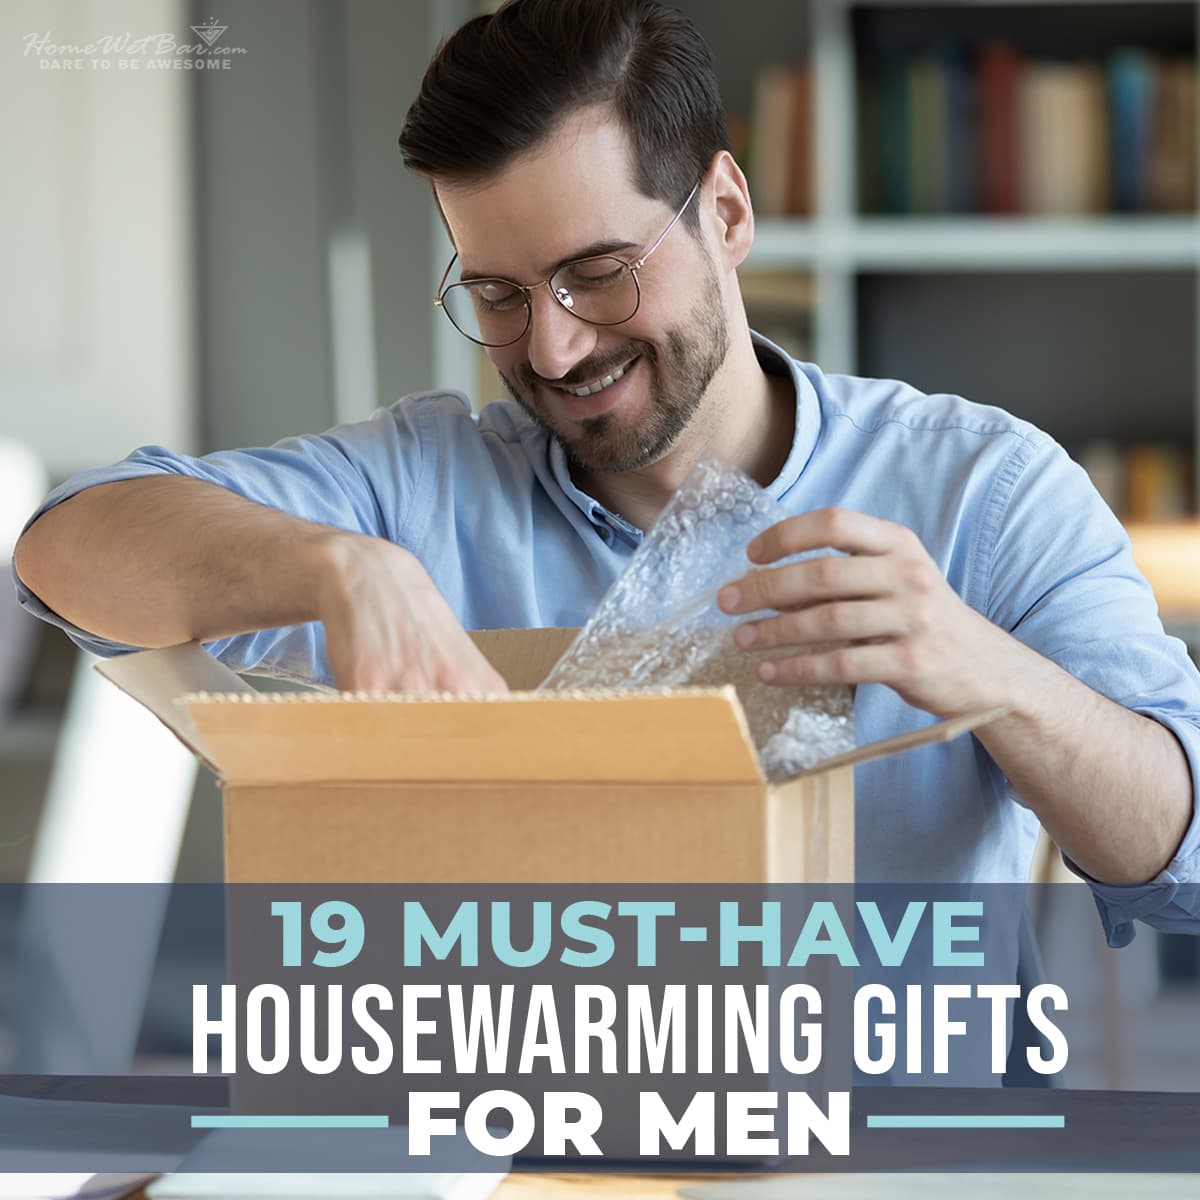 19 Must-Have Housewarming Gifts for Men